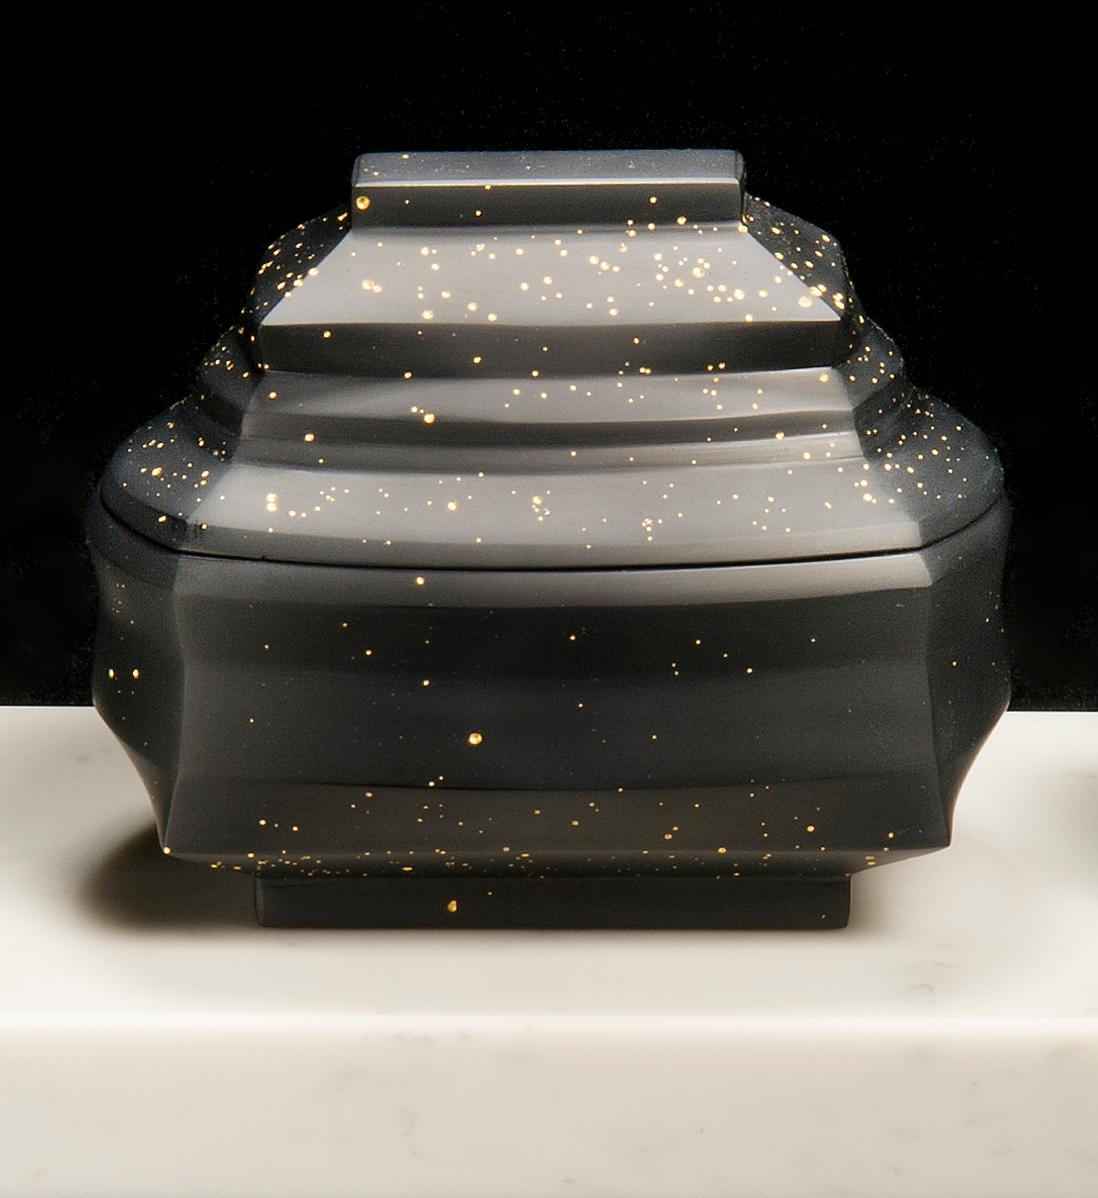 Daam Dah Triptych, a Unique Artglass Set of Three Lidded Boxes by Choi Keeryong 2